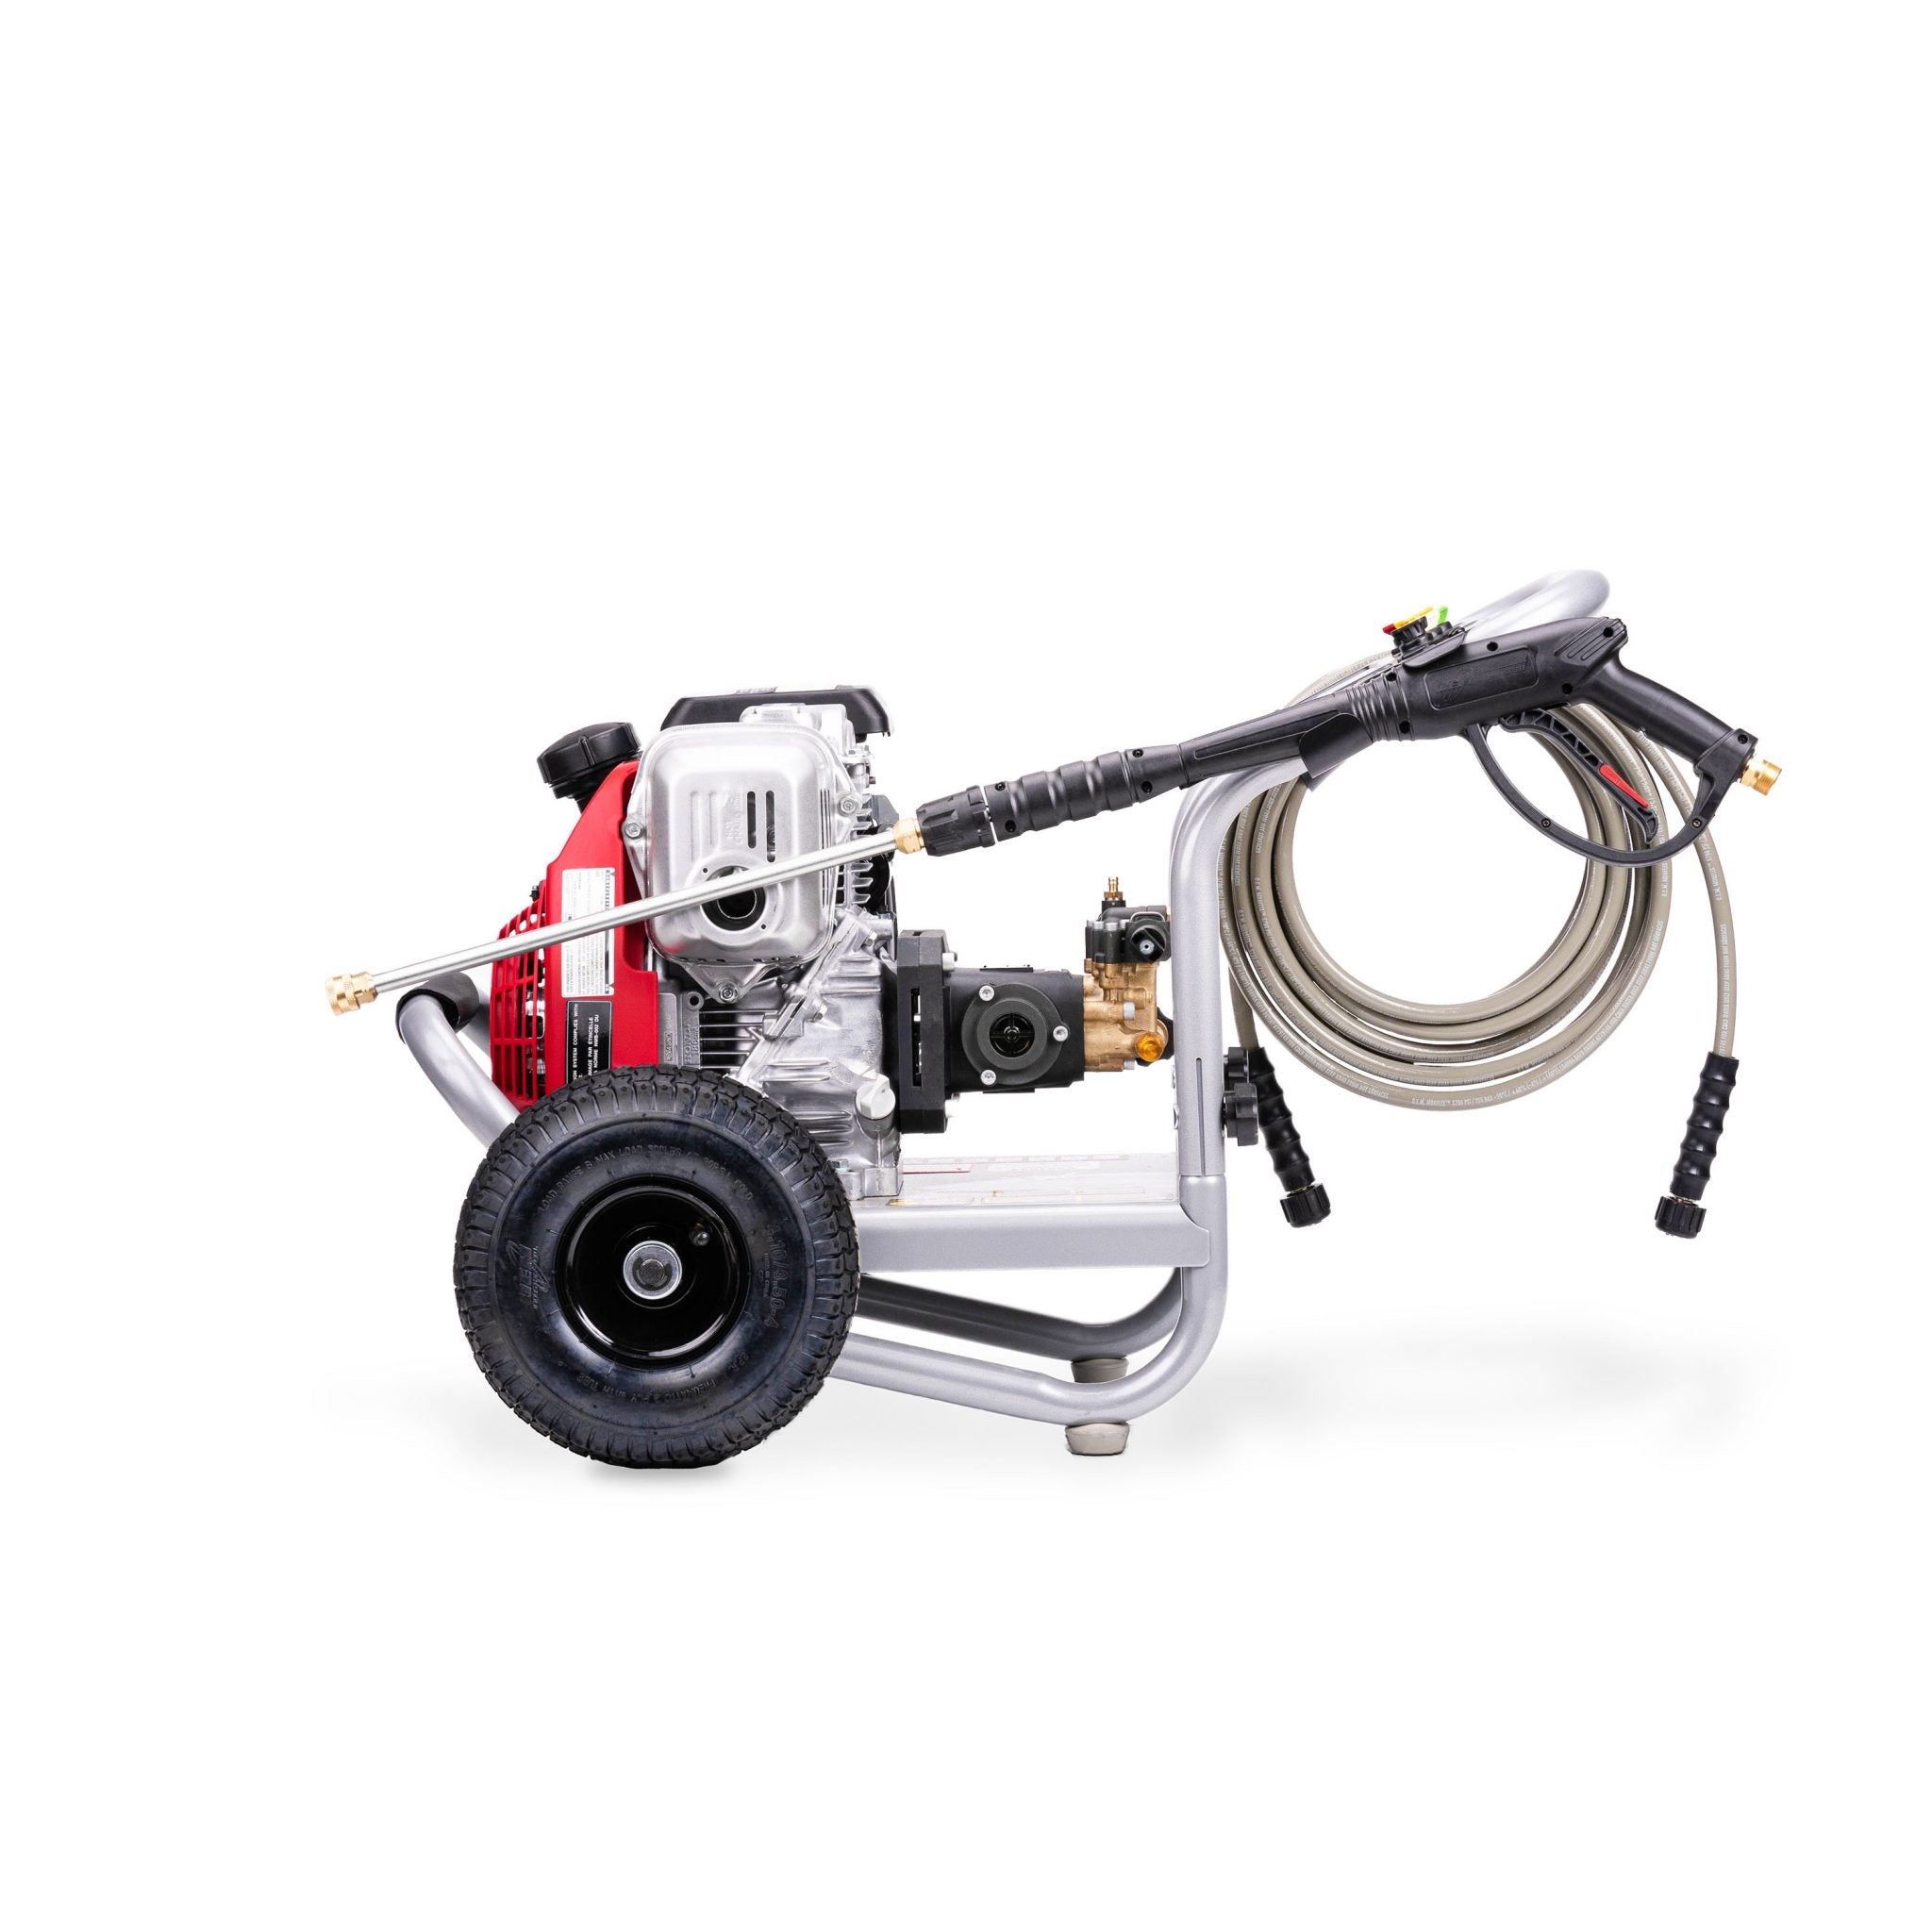 Simpson 3400 PSI at 2.3 GPM HONDA GS190 with AAA AX300 Pro Axial Pump Cold Water Professional Gas Pressure Washer (Factory Refurbished)